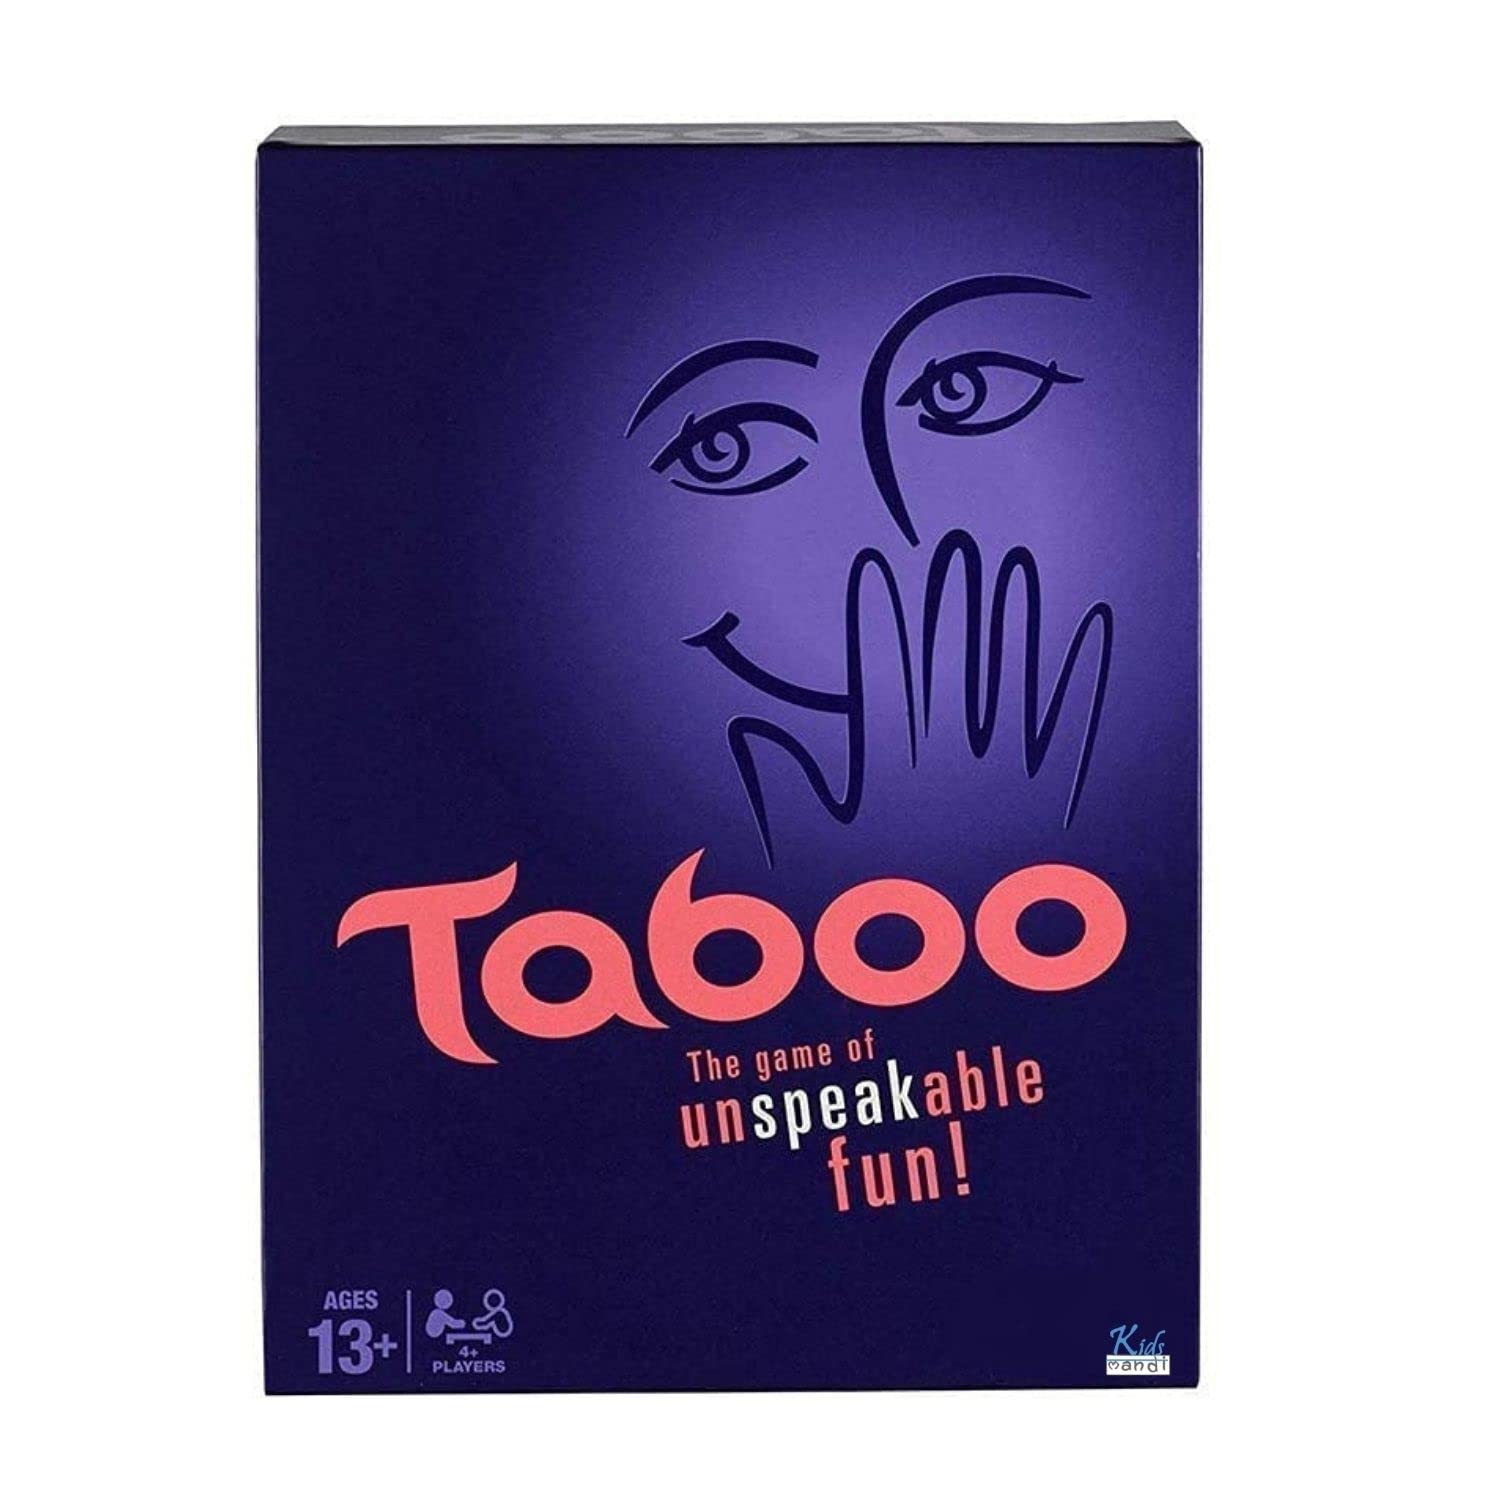 KIDS MANDI taboo-board-game featuring fun and educational gameplay opportunities for children.